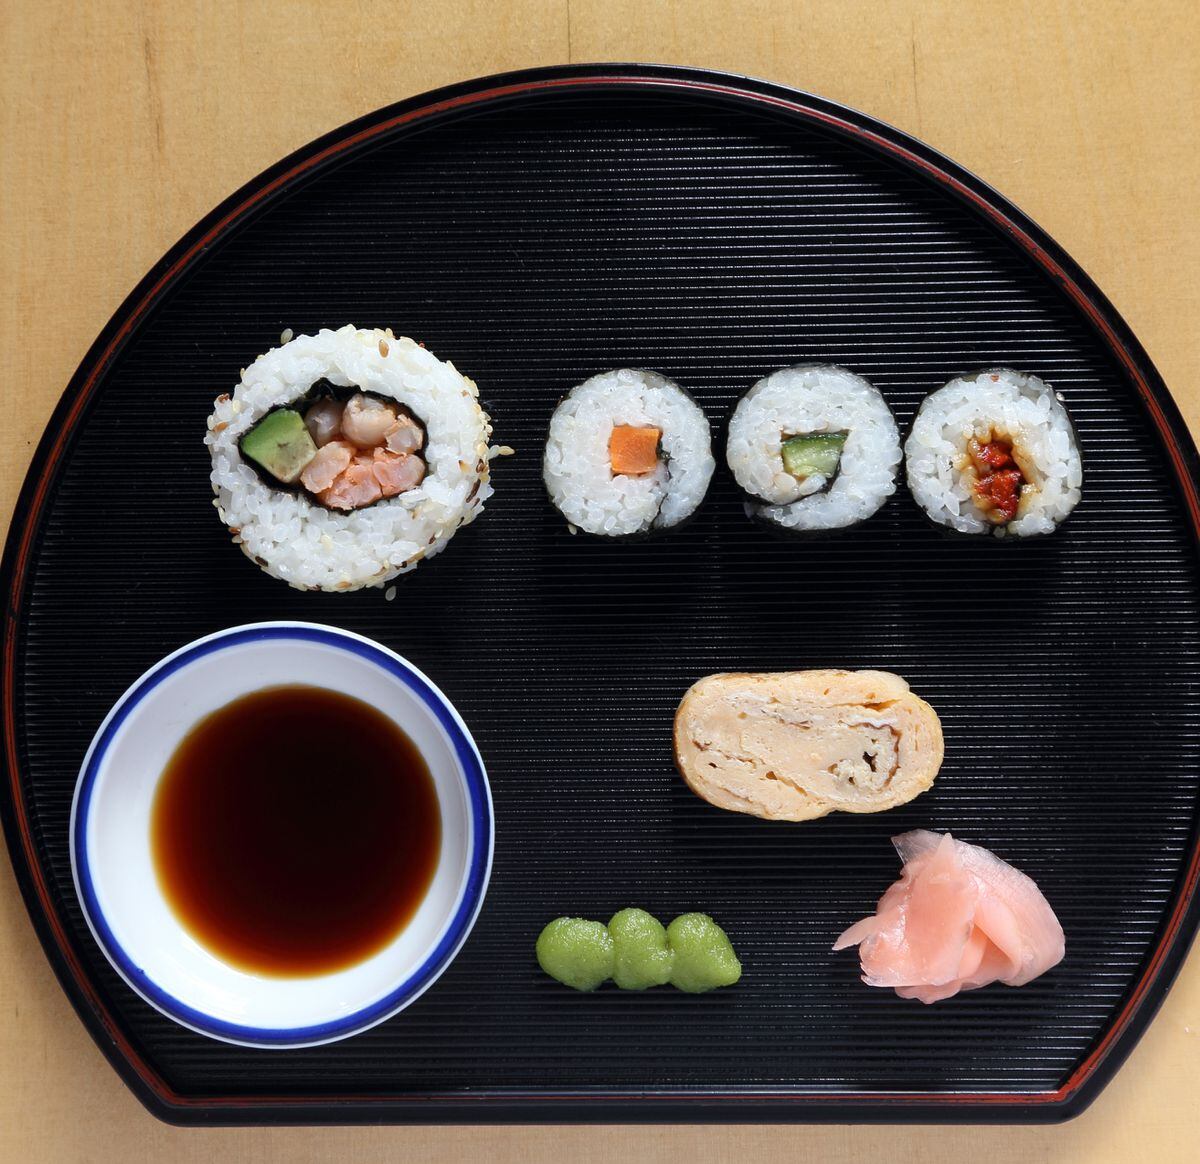 Roll with it – a freshly-prepared plate of sushi 